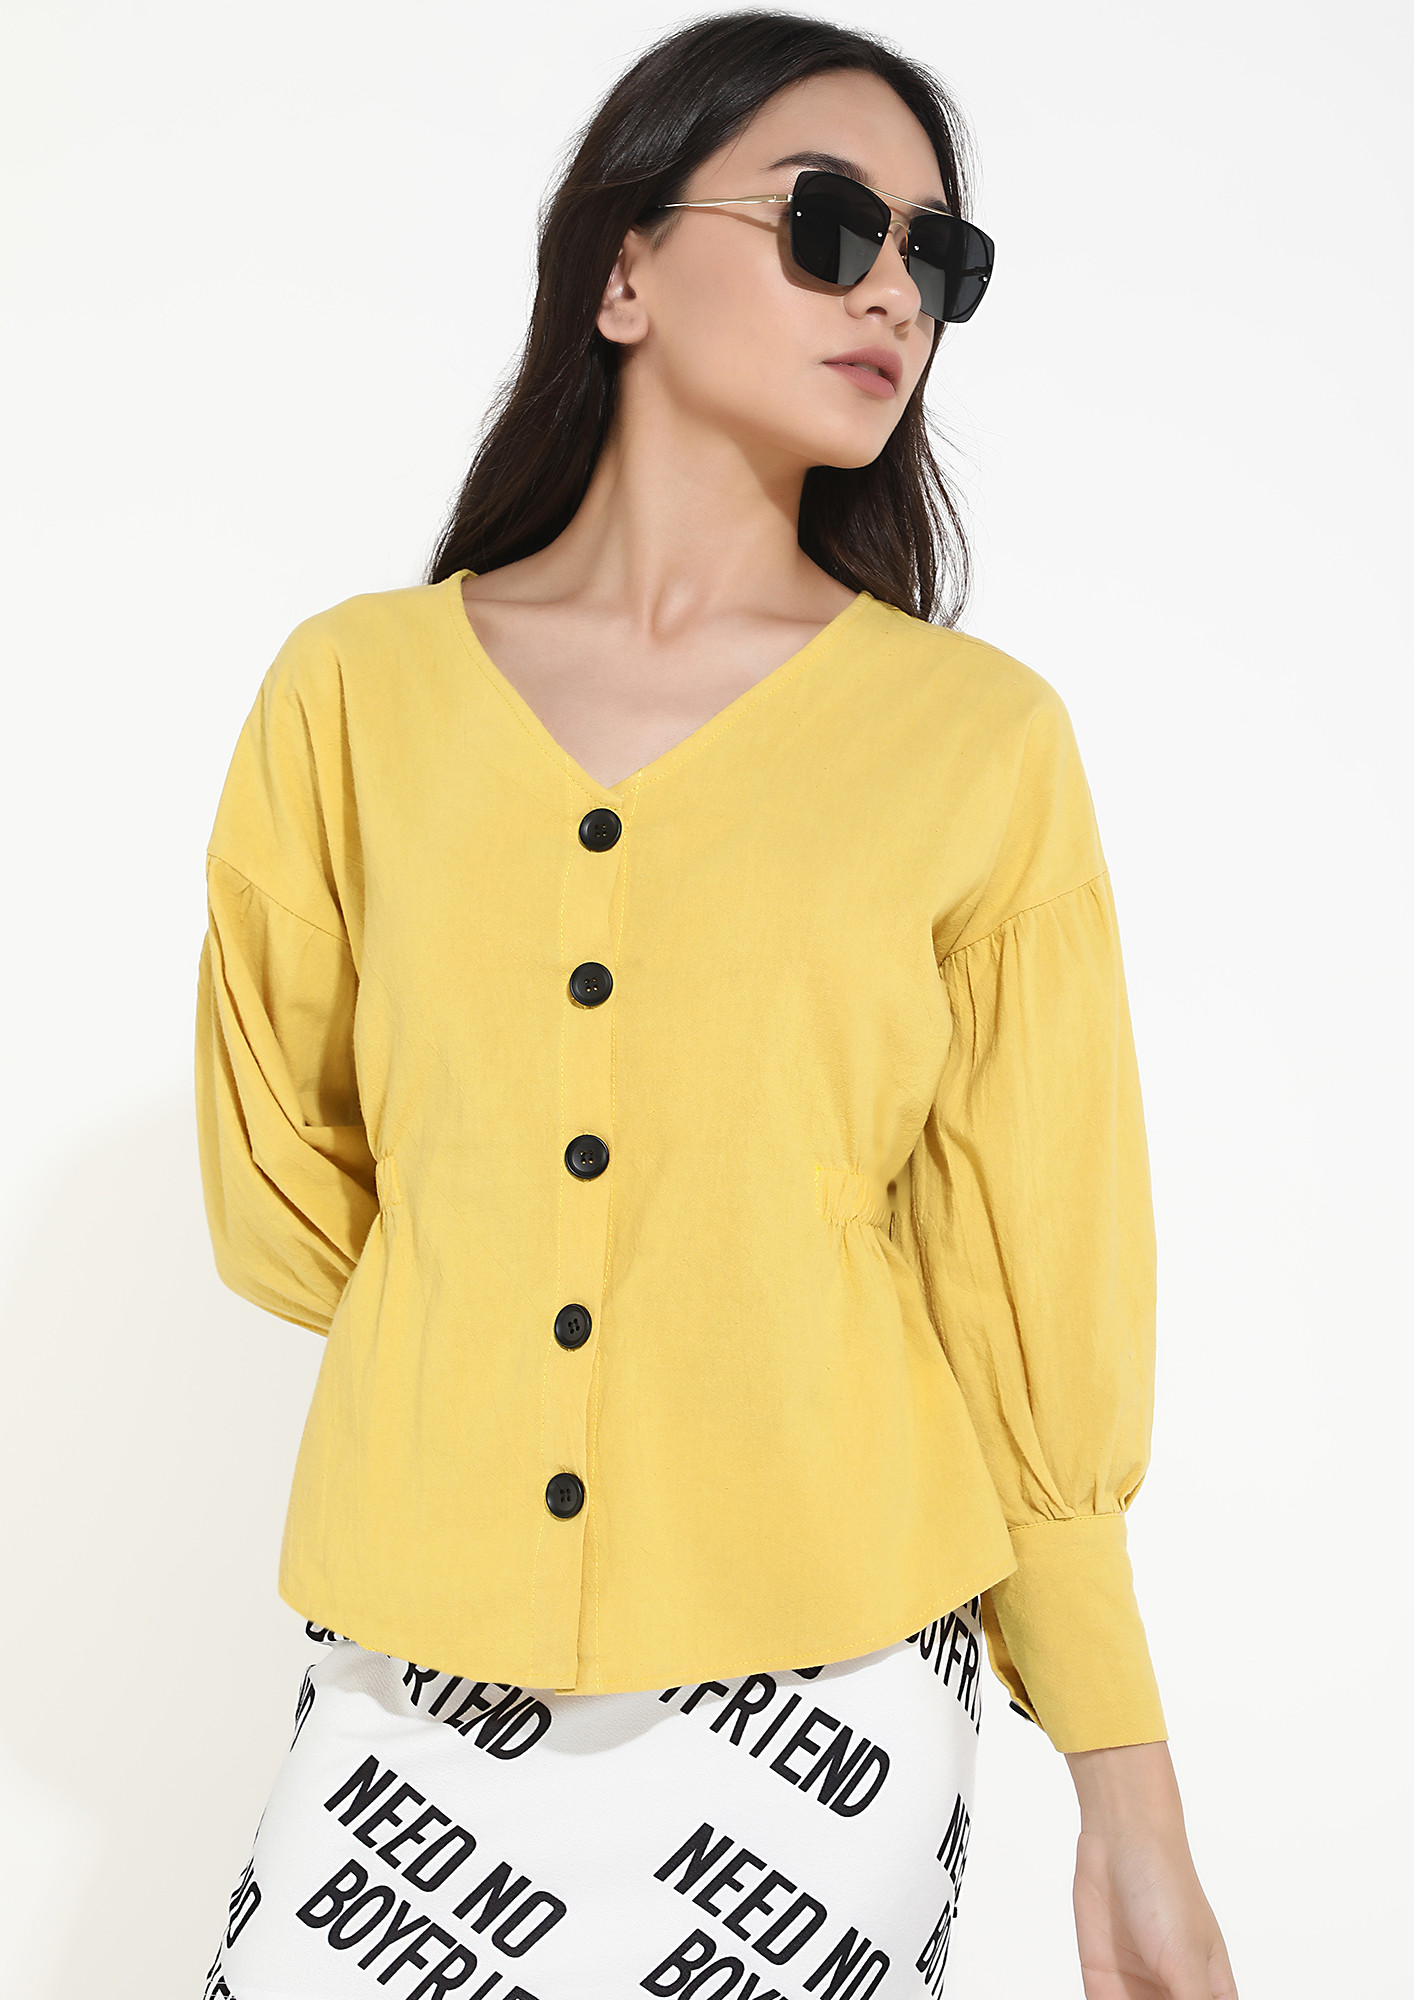 FROM THE MAGIC YELLOW TOP